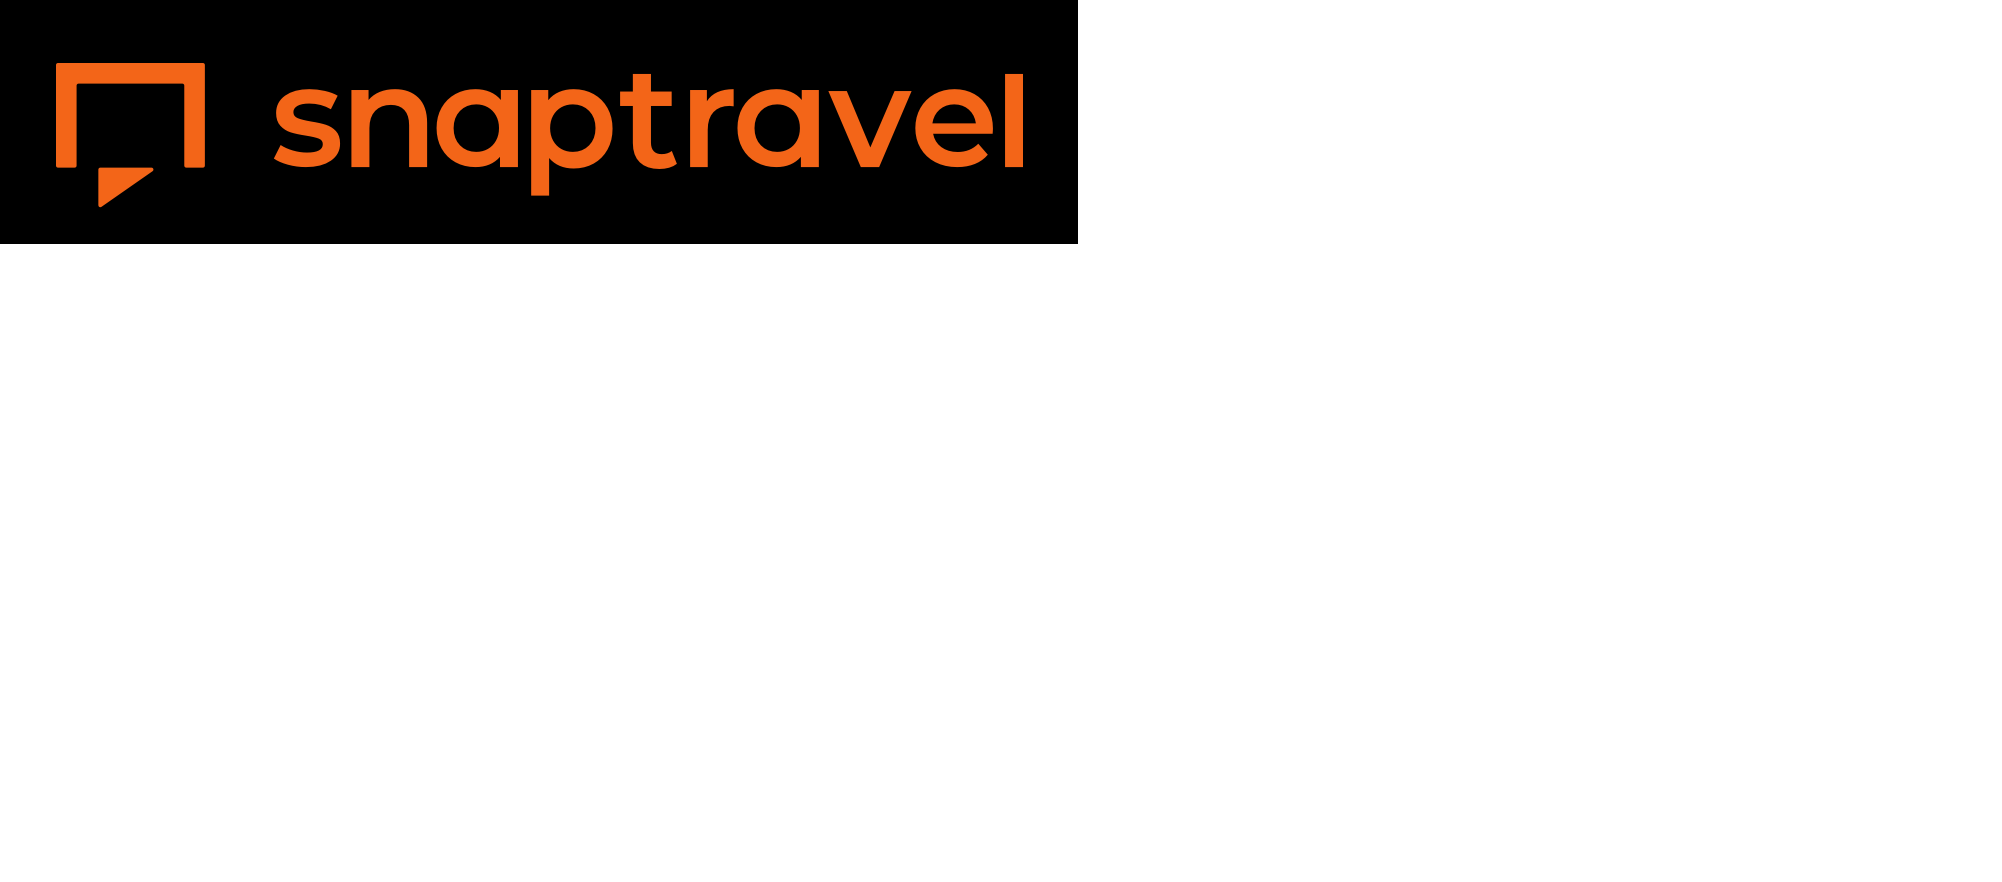 Is Snaptravel Legit?,Final Thoughts on Snaptravel,Reviews of Snaptravel